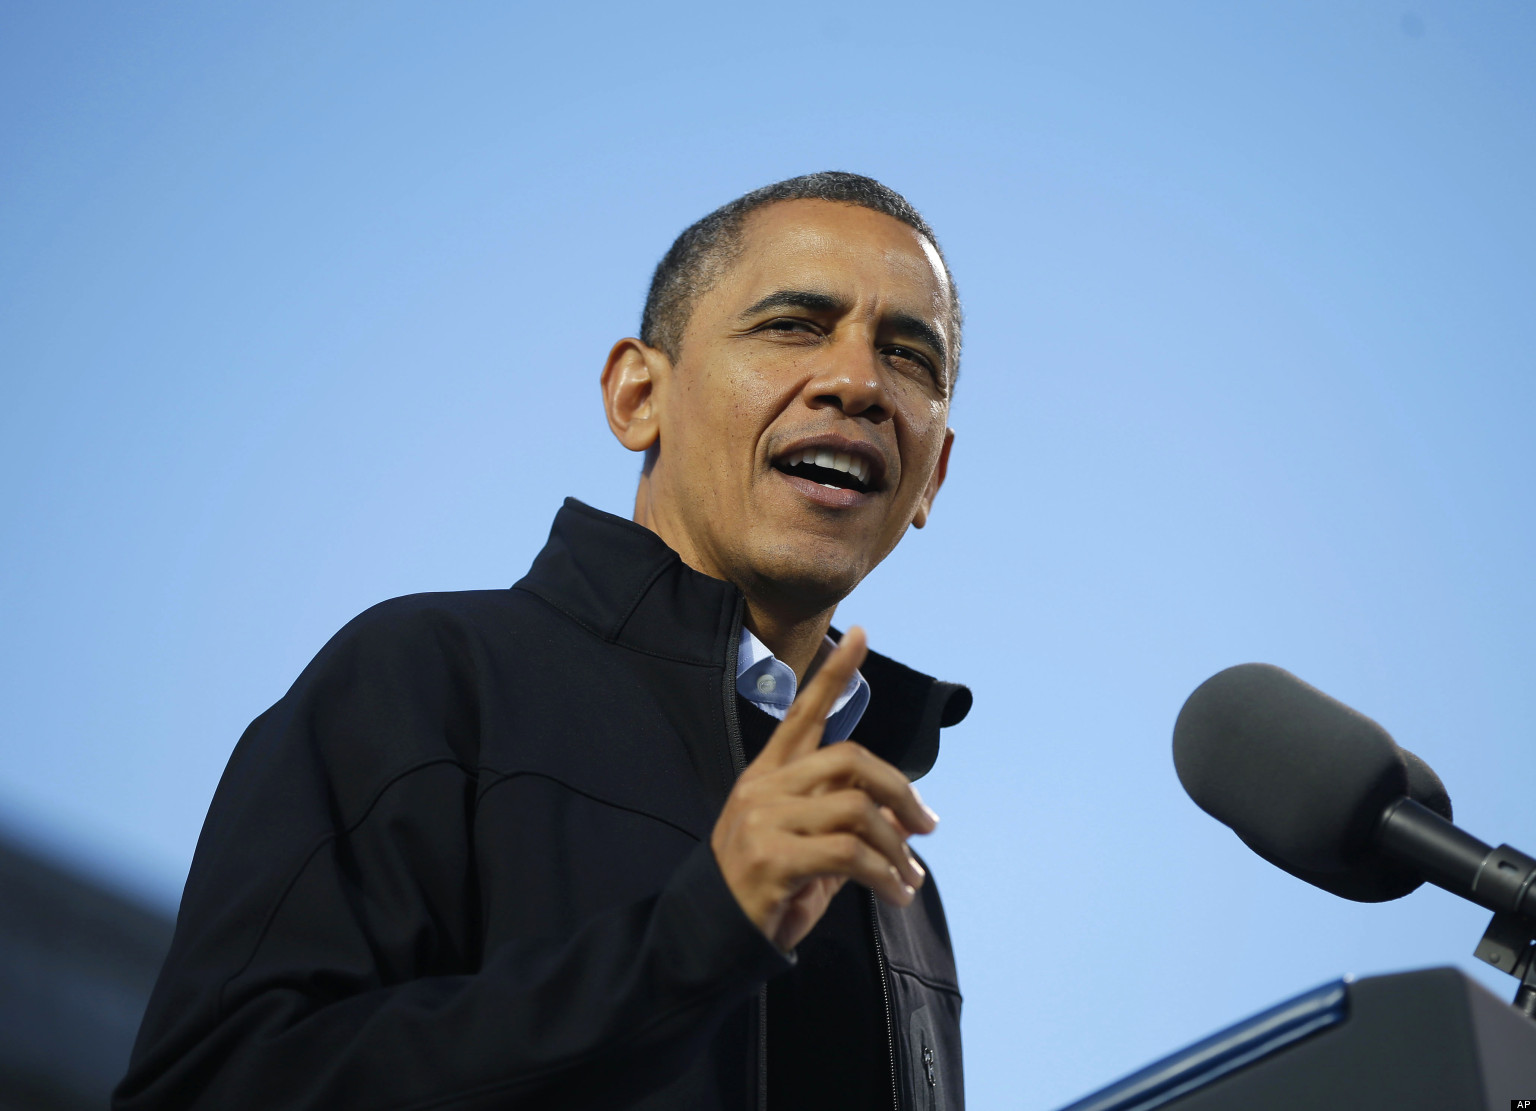 Obama Has 'Modest Lead' Over Romney: Final Pew Poll | HuffPost